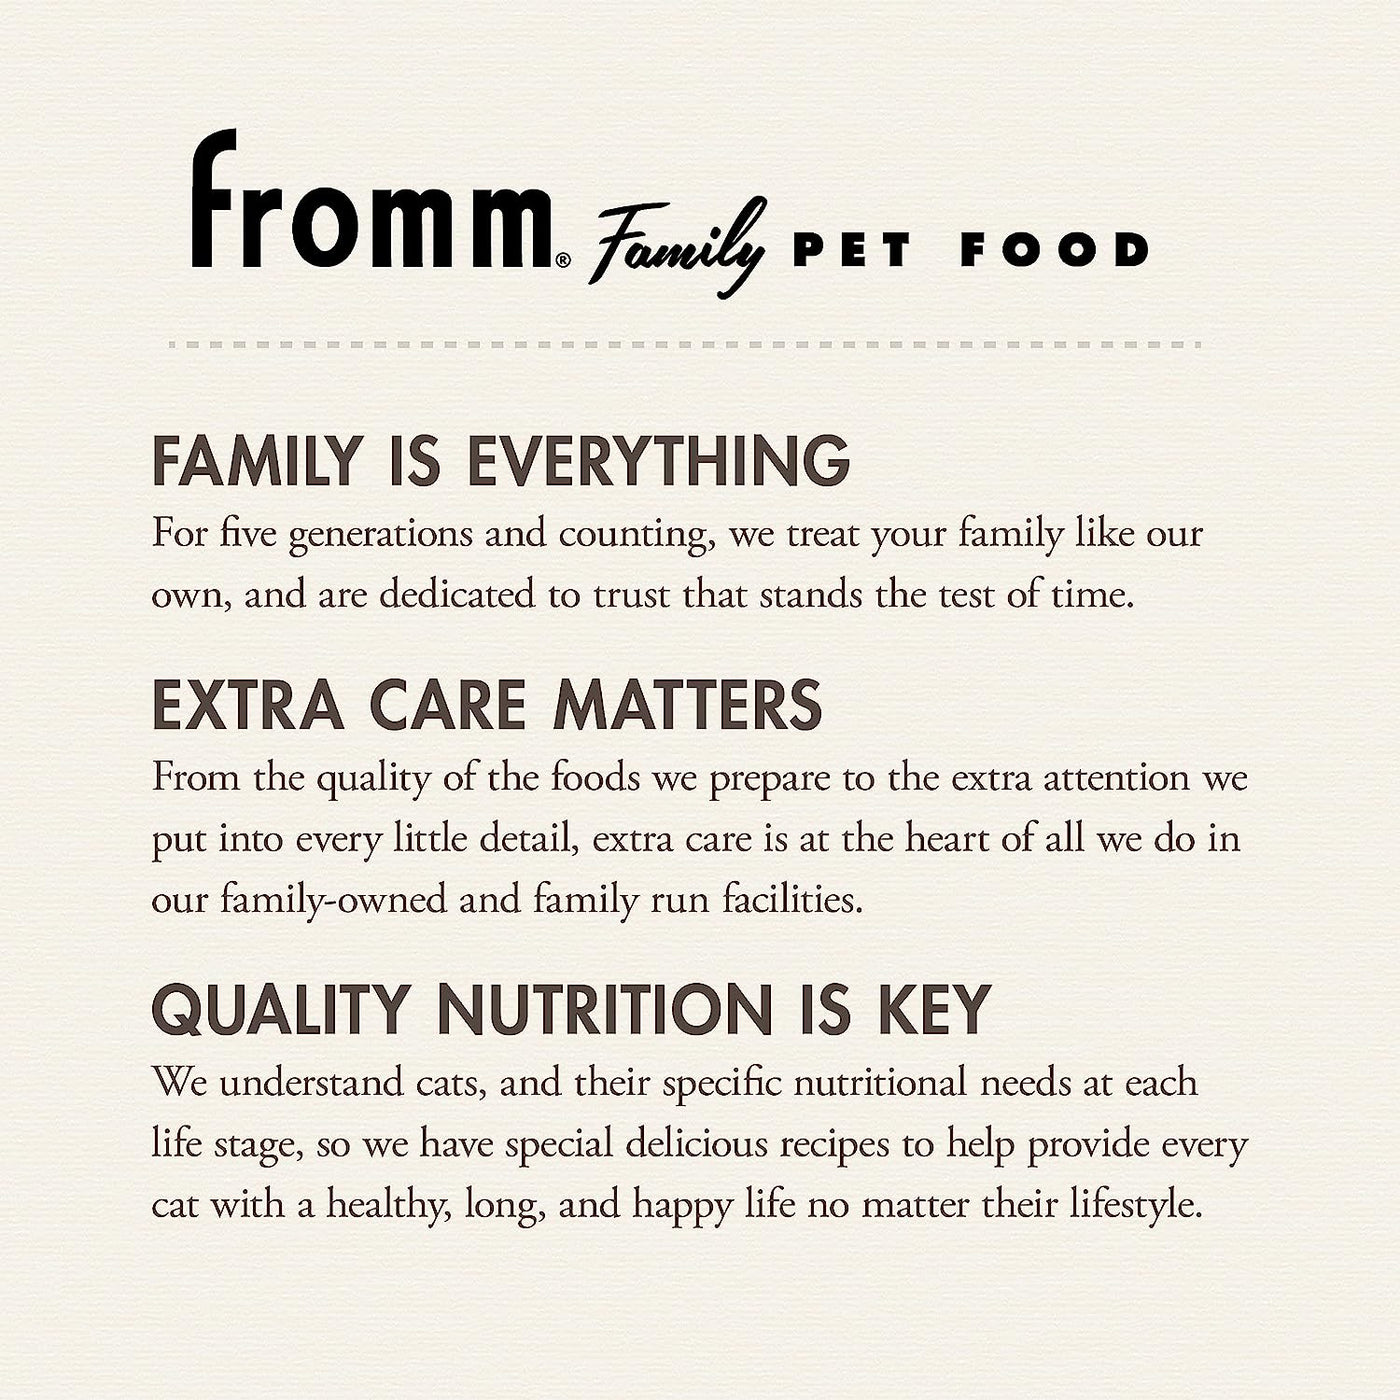 Fromm Family Pet Food: Family Is Everything